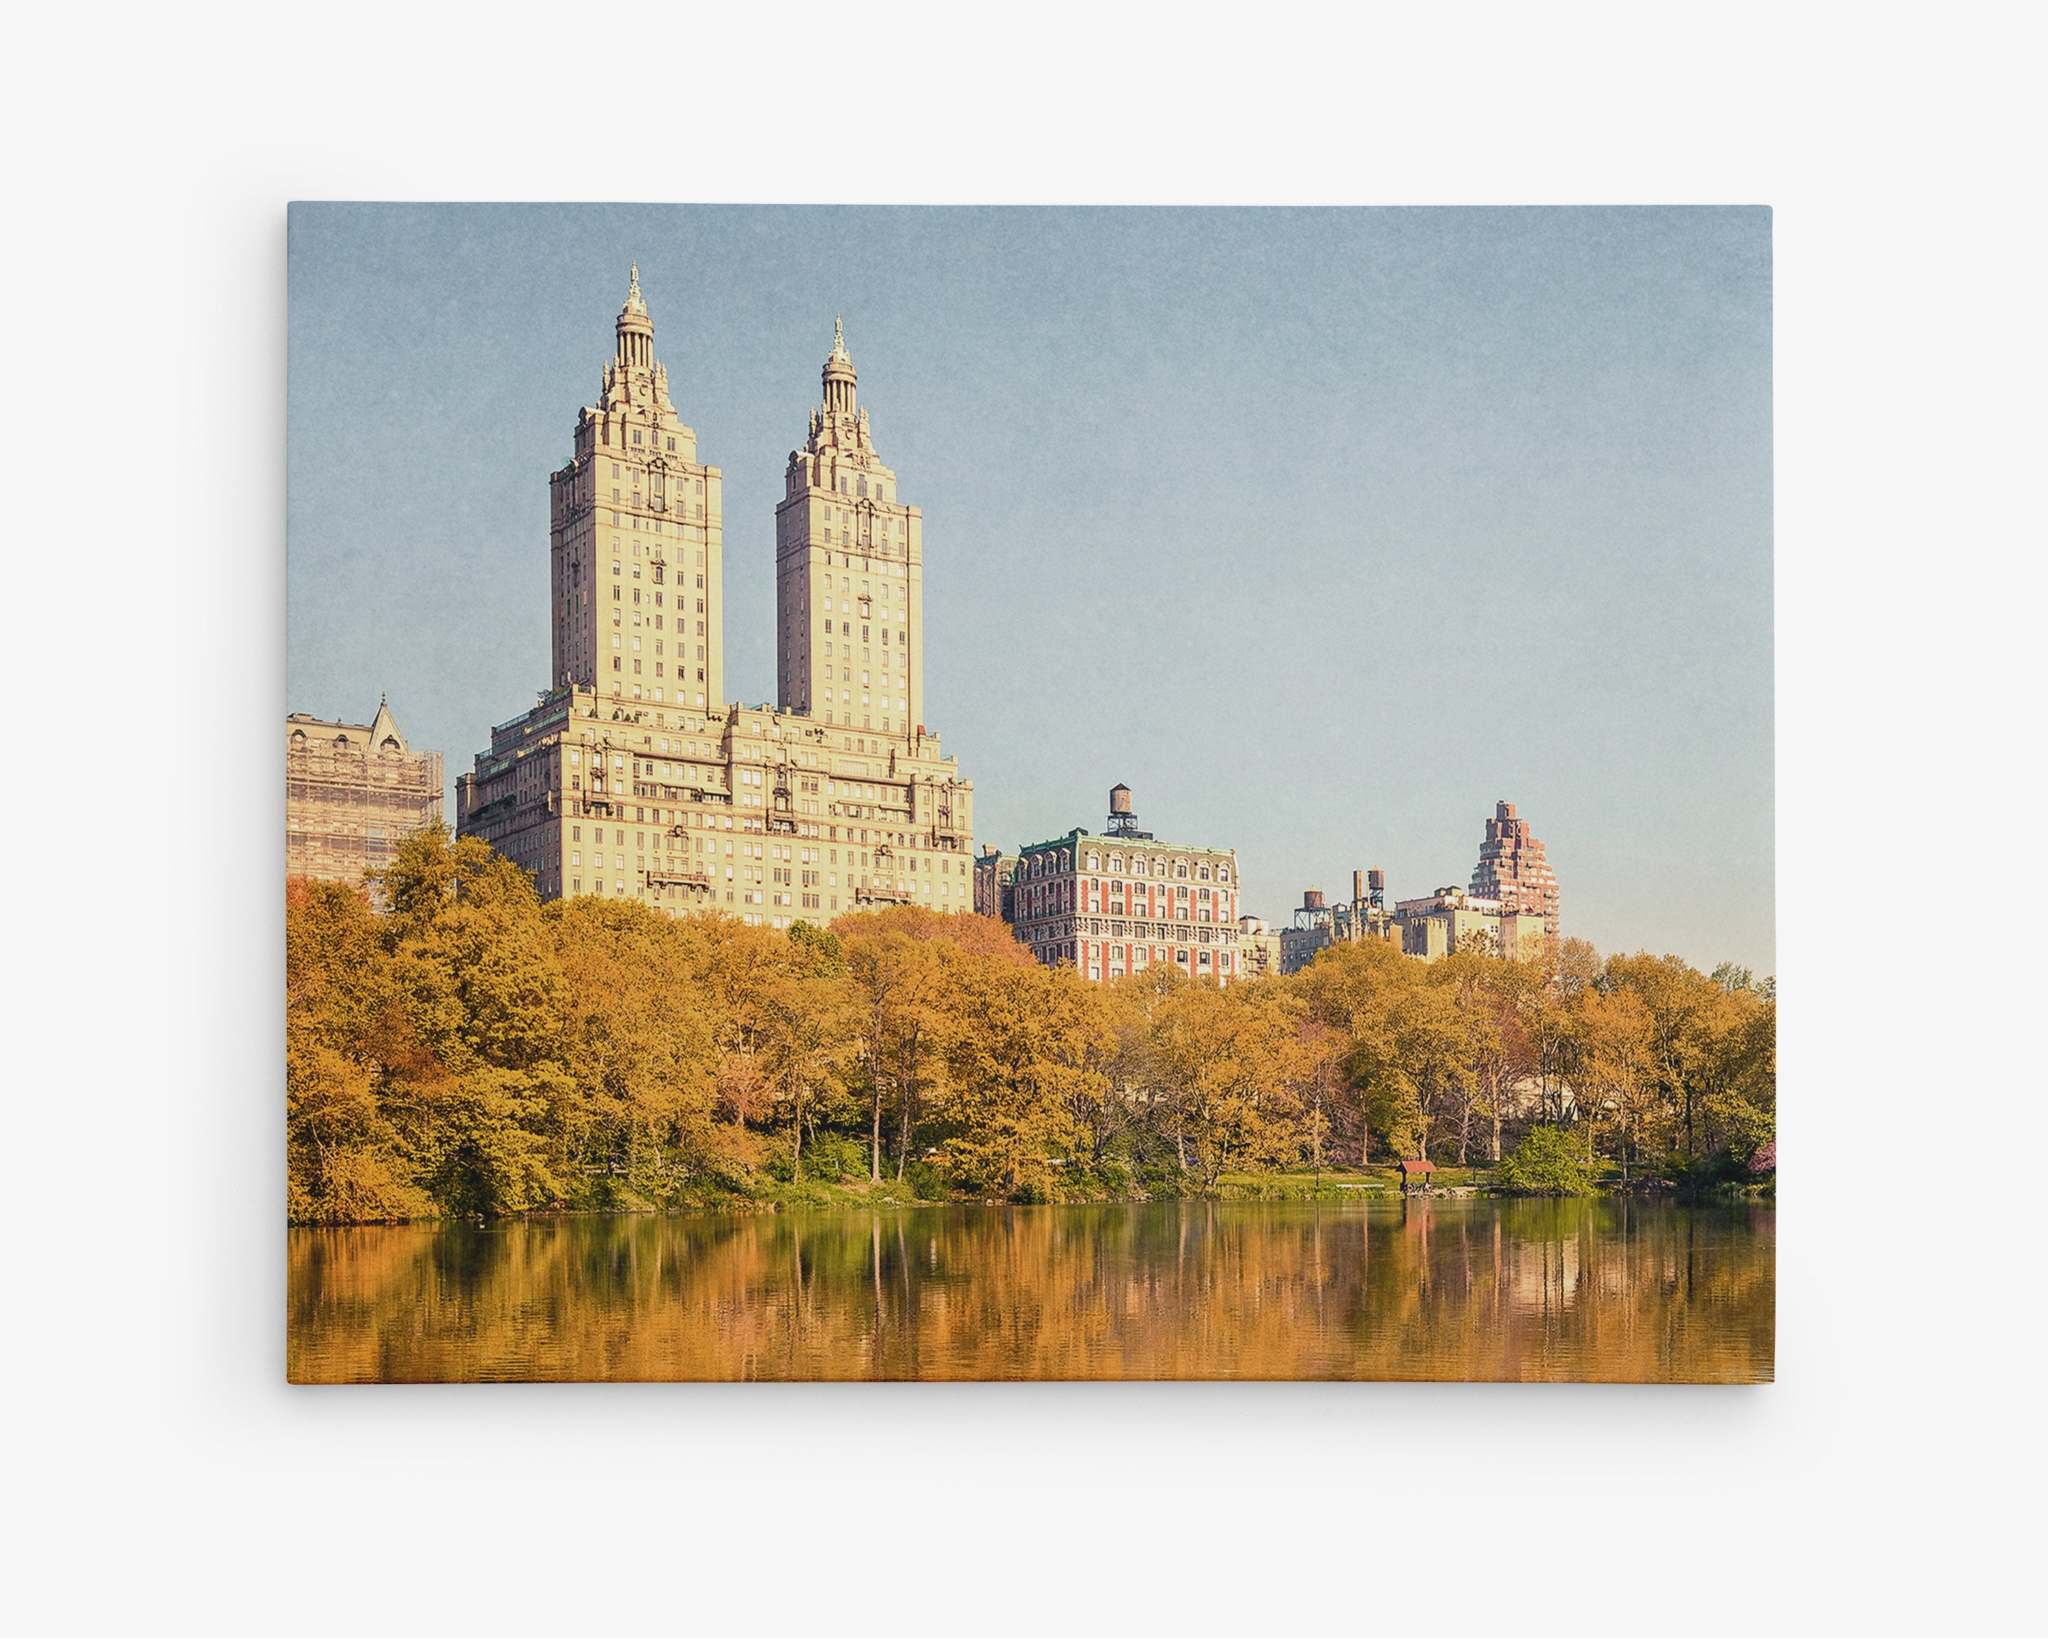 A view of two tall, adjacent buildings with spires, set against a clear blue sky. The buildings are flanked by shorter structures, and there are trees with autumn foliage in the foreground, reflected in a calm body of water below. This scene is captured on the Offley Green New York City Canvas Wall Art, 'Central Park Fall,' offering a ready-to-hang solution for your home.